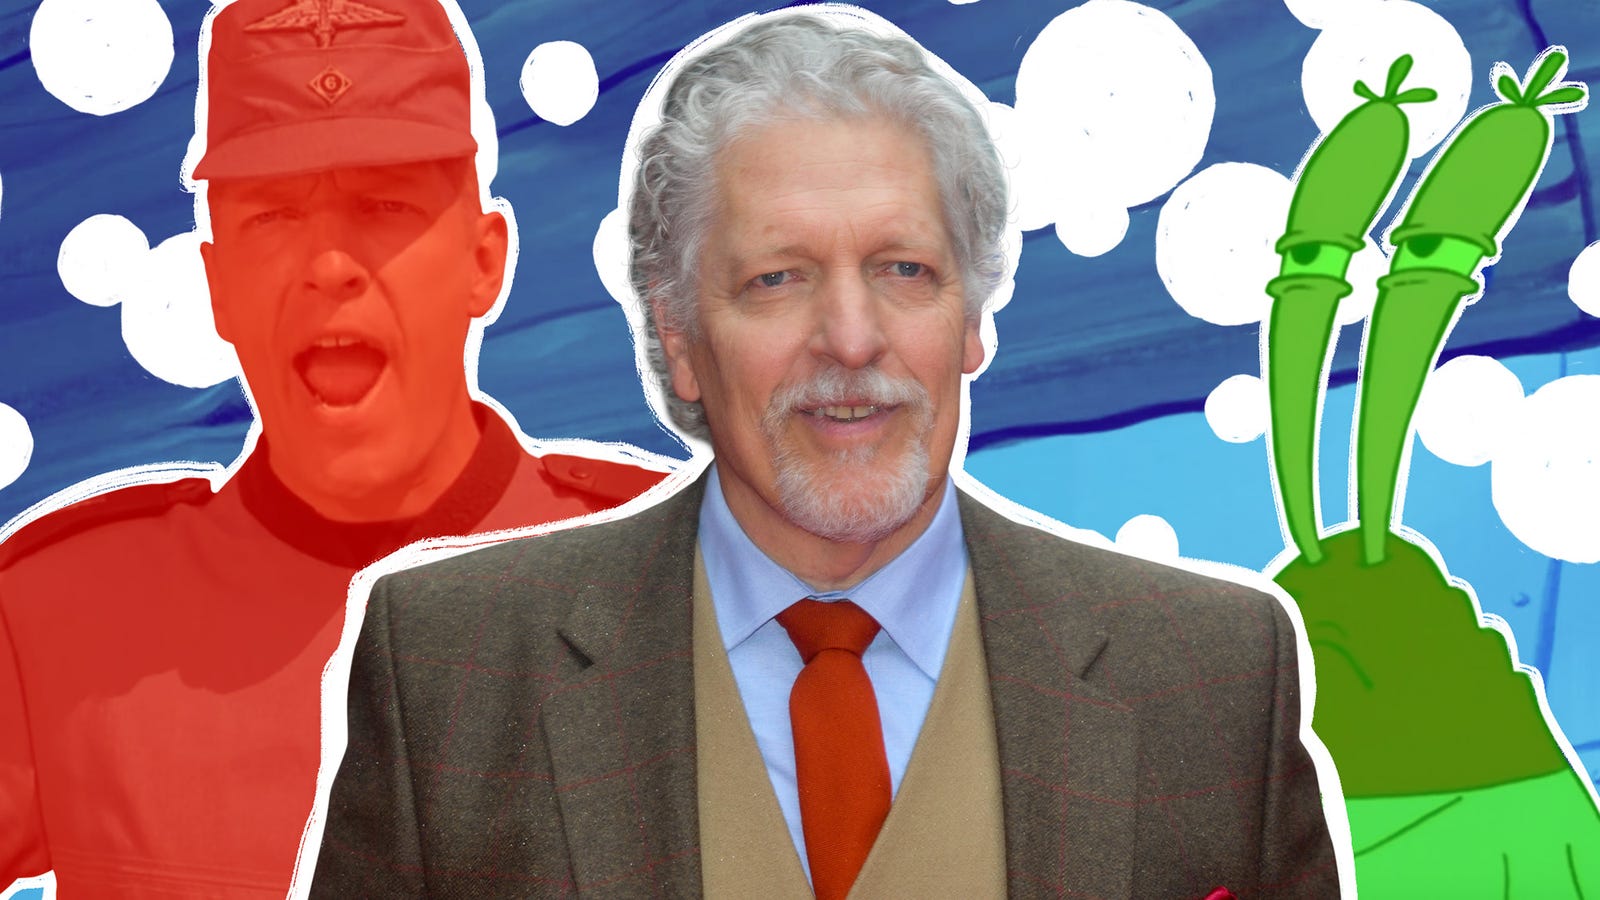 Clancy Brown on his diverse career, from playing baddies in Starship Troopers and Shawshank Redemption to voicing Mr. Krabs